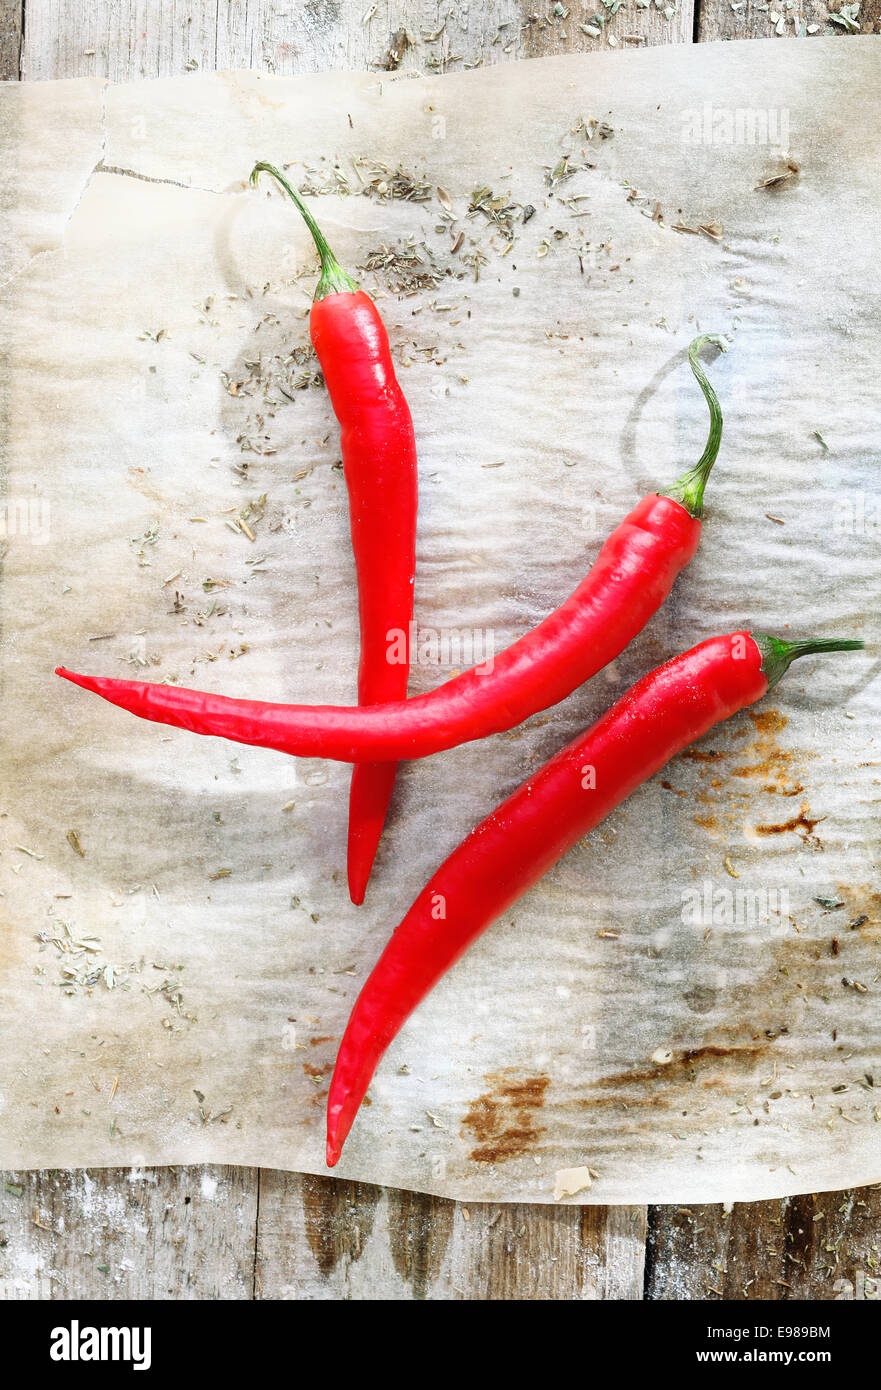 Red chilli peppers on a sheet of grunge used oven paper on a rustic wooden table Stock Photo